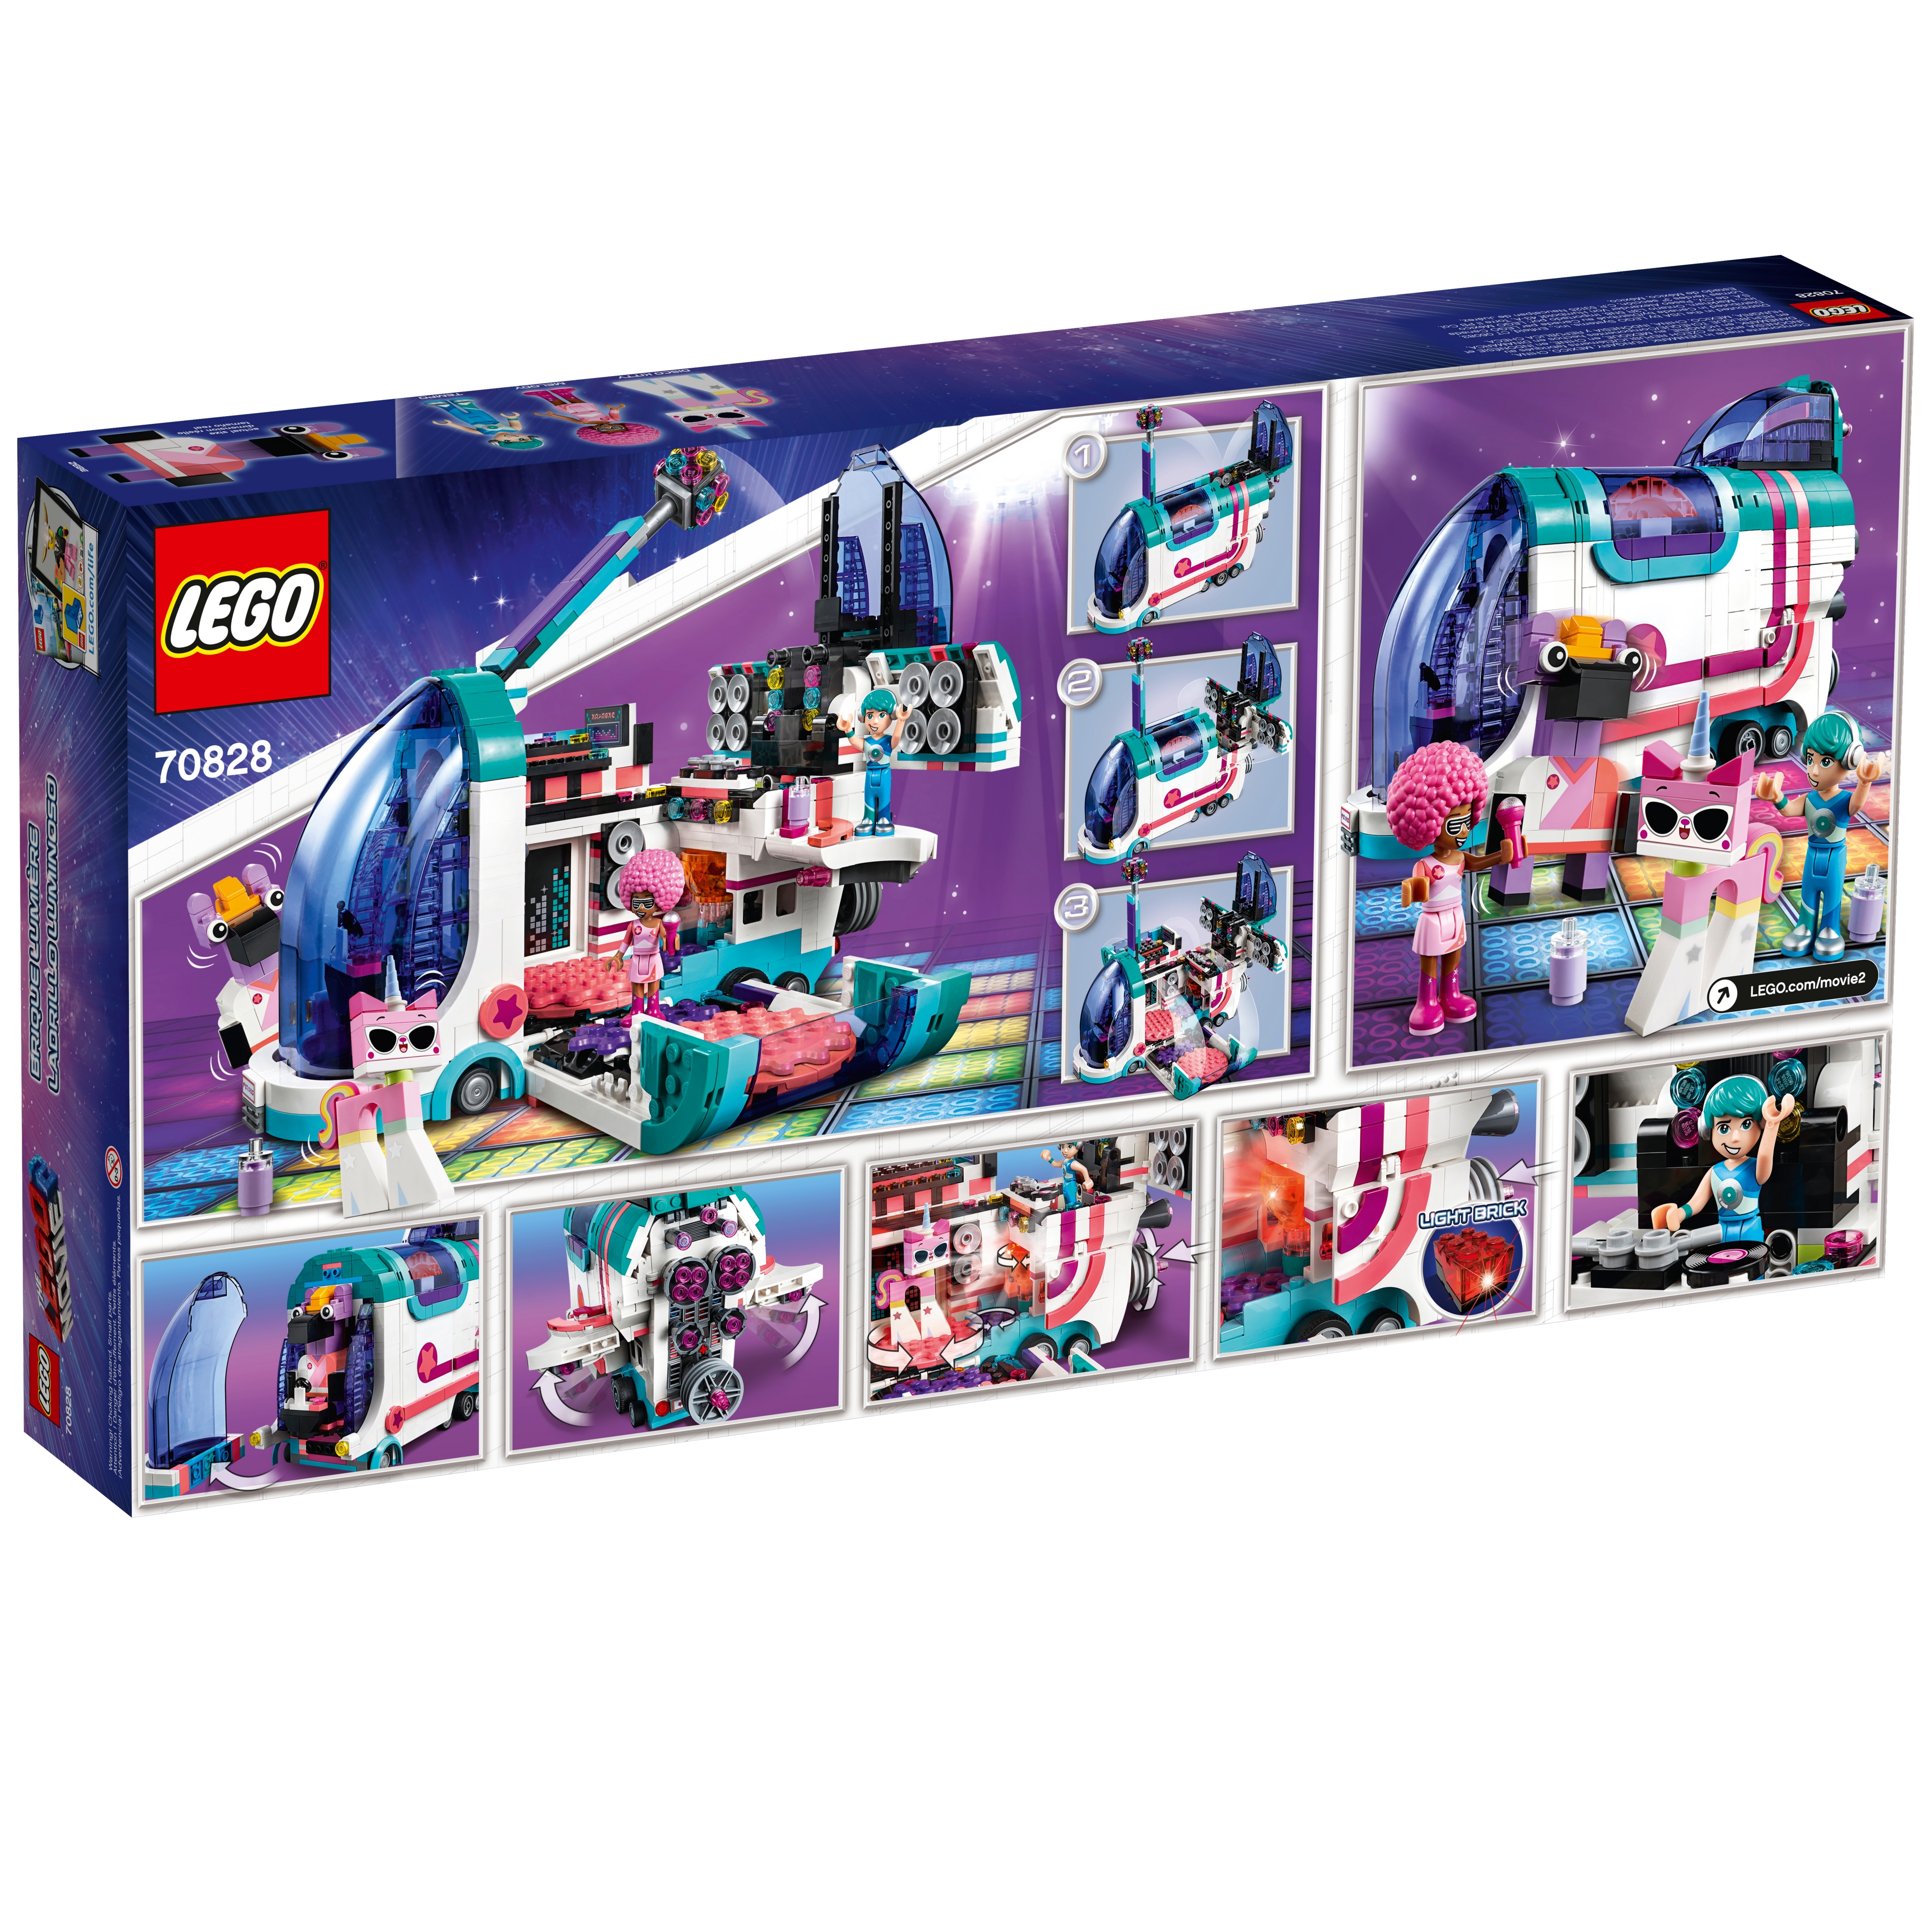 From Pop Up Party Bus Set . LEGO Tempo Only 70828